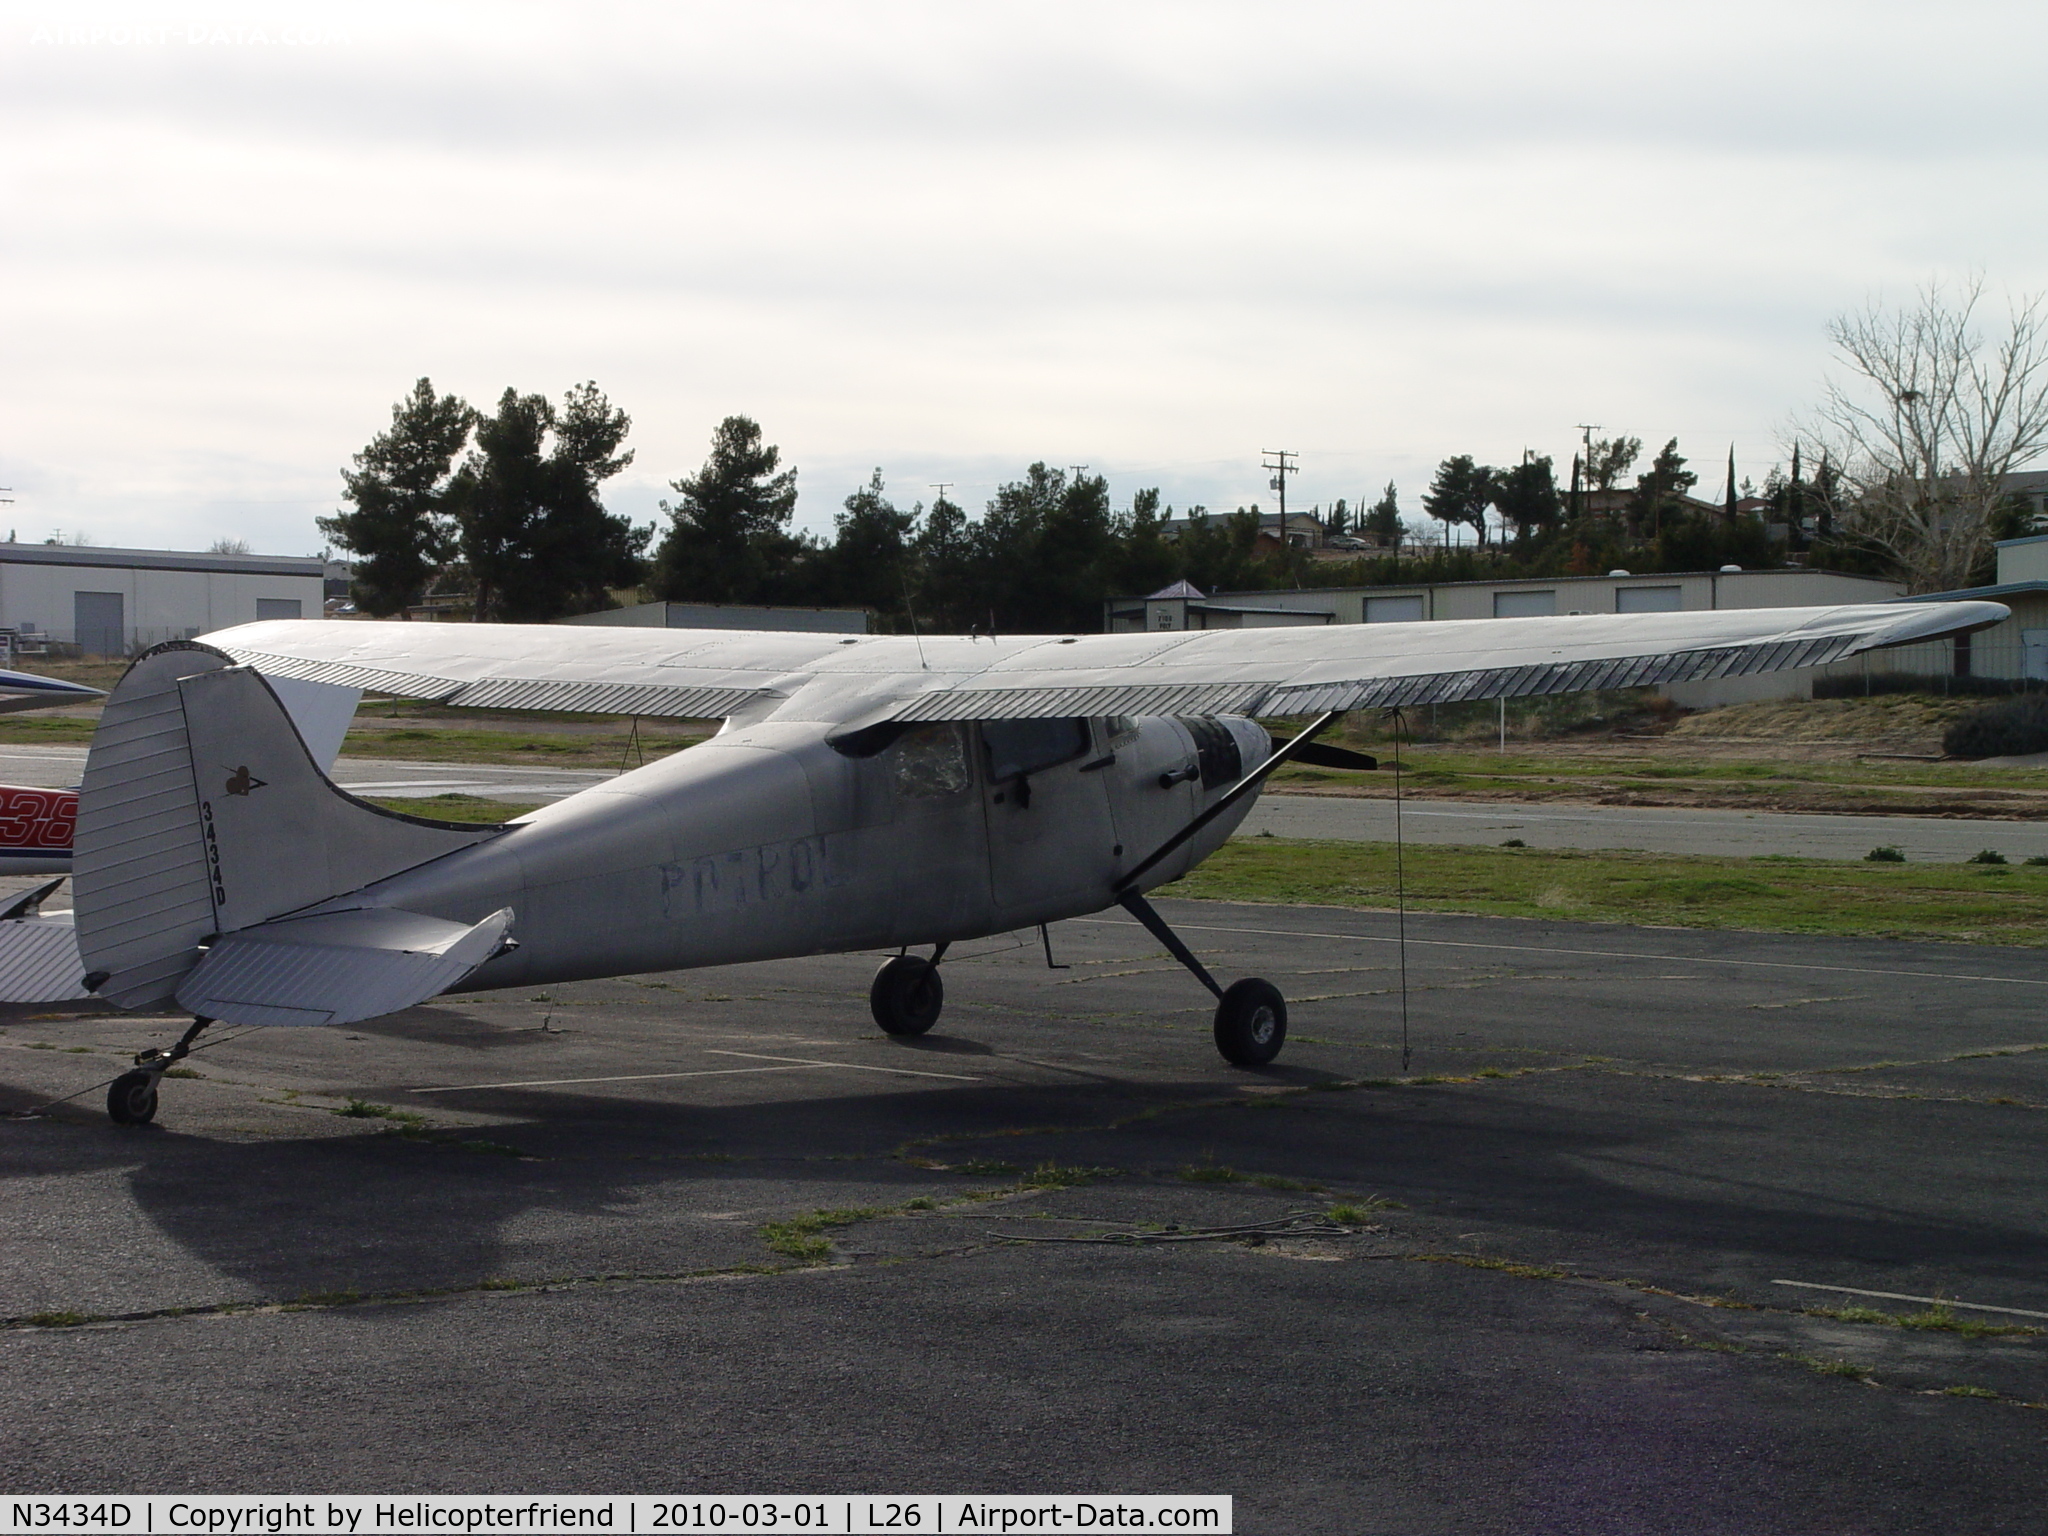 N3434D, 1955 Cessna 170B C/N 26977, Parked at Hesperia Airport